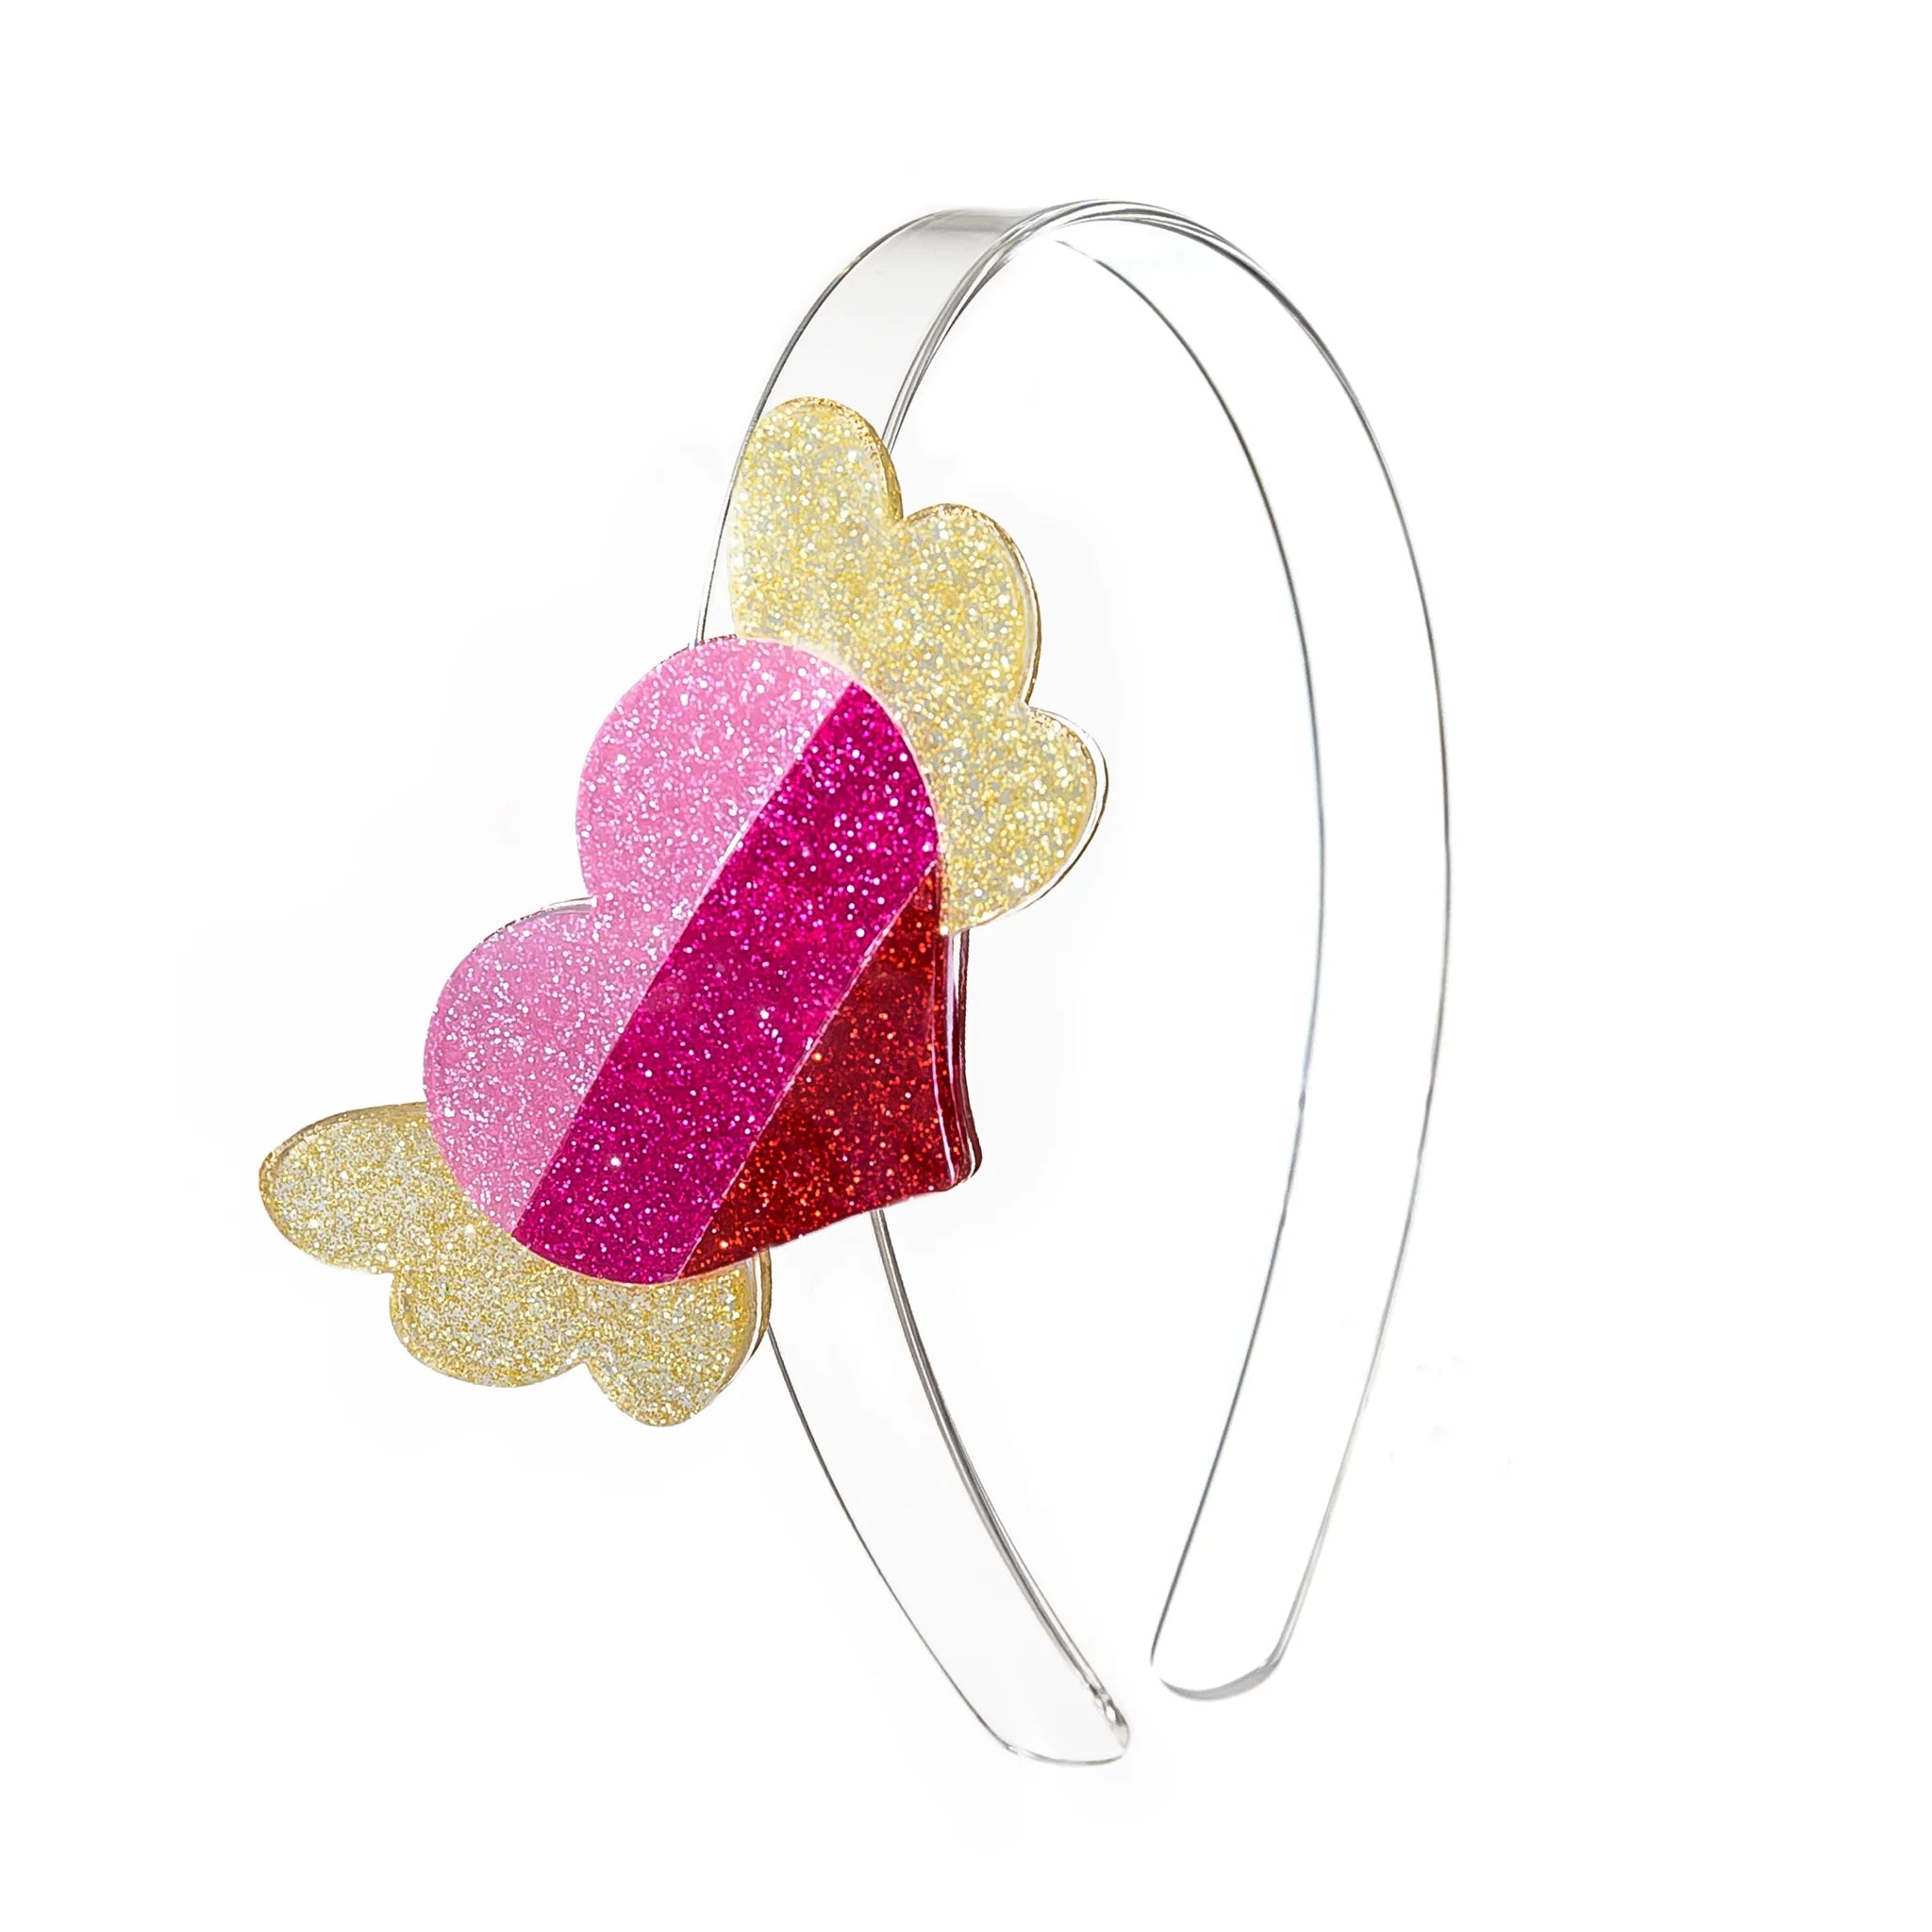 Winged Heart Headband - Teich Toys & Gifts